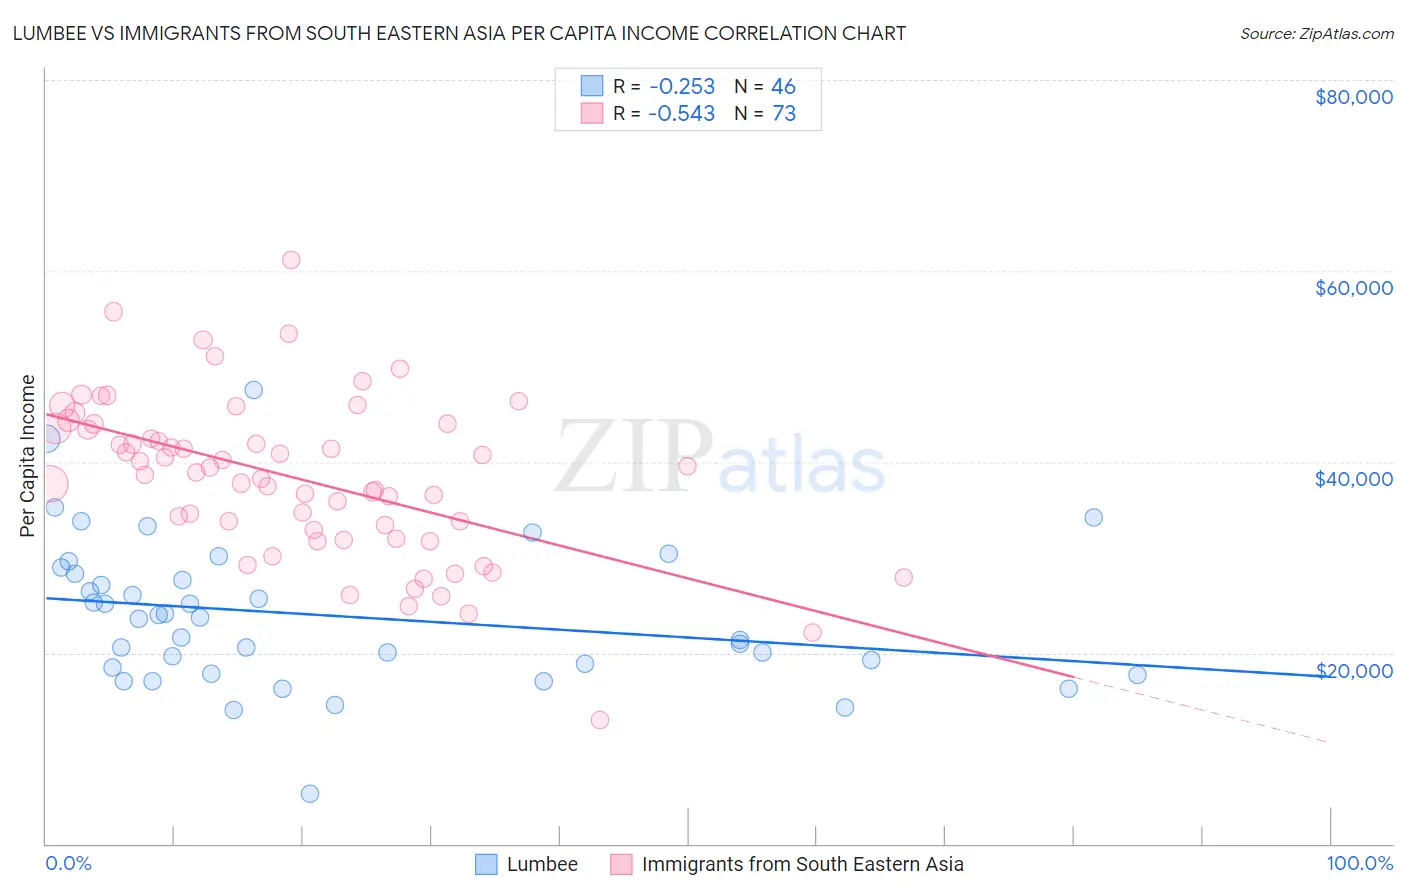 Lumbee vs Immigrants from South Eastern Asia Per Capita Income